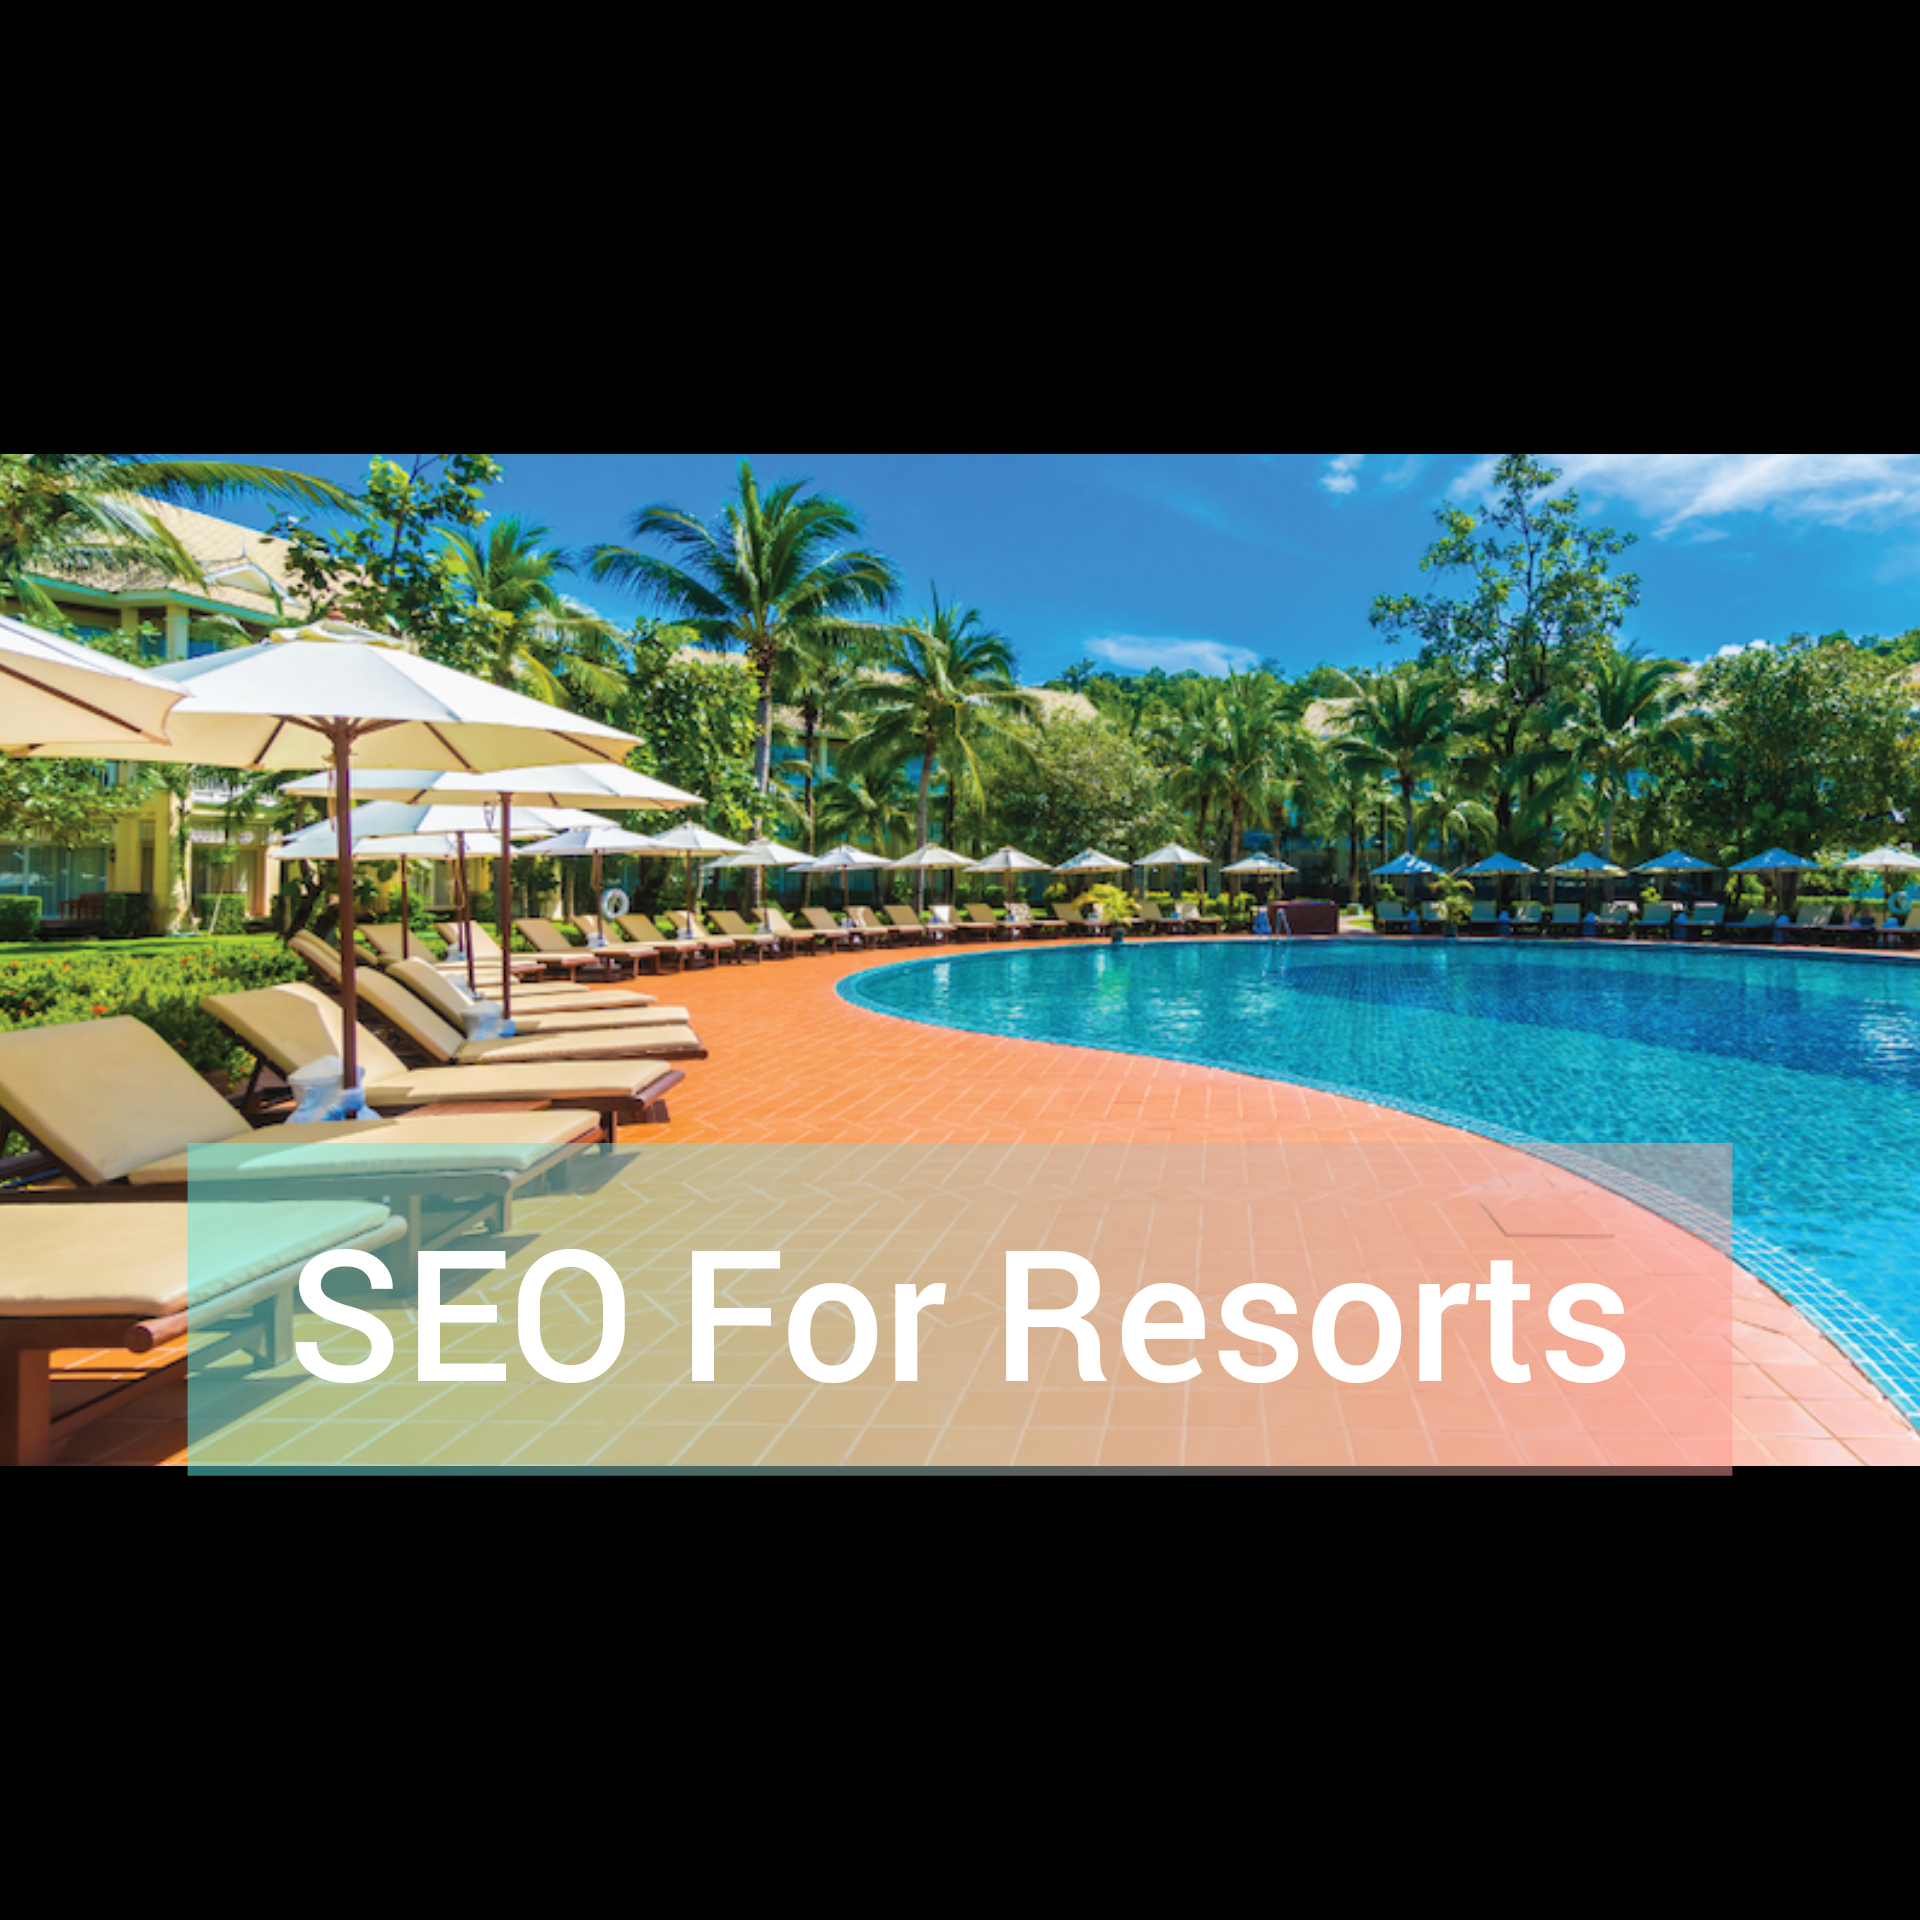 SEO For Resorts